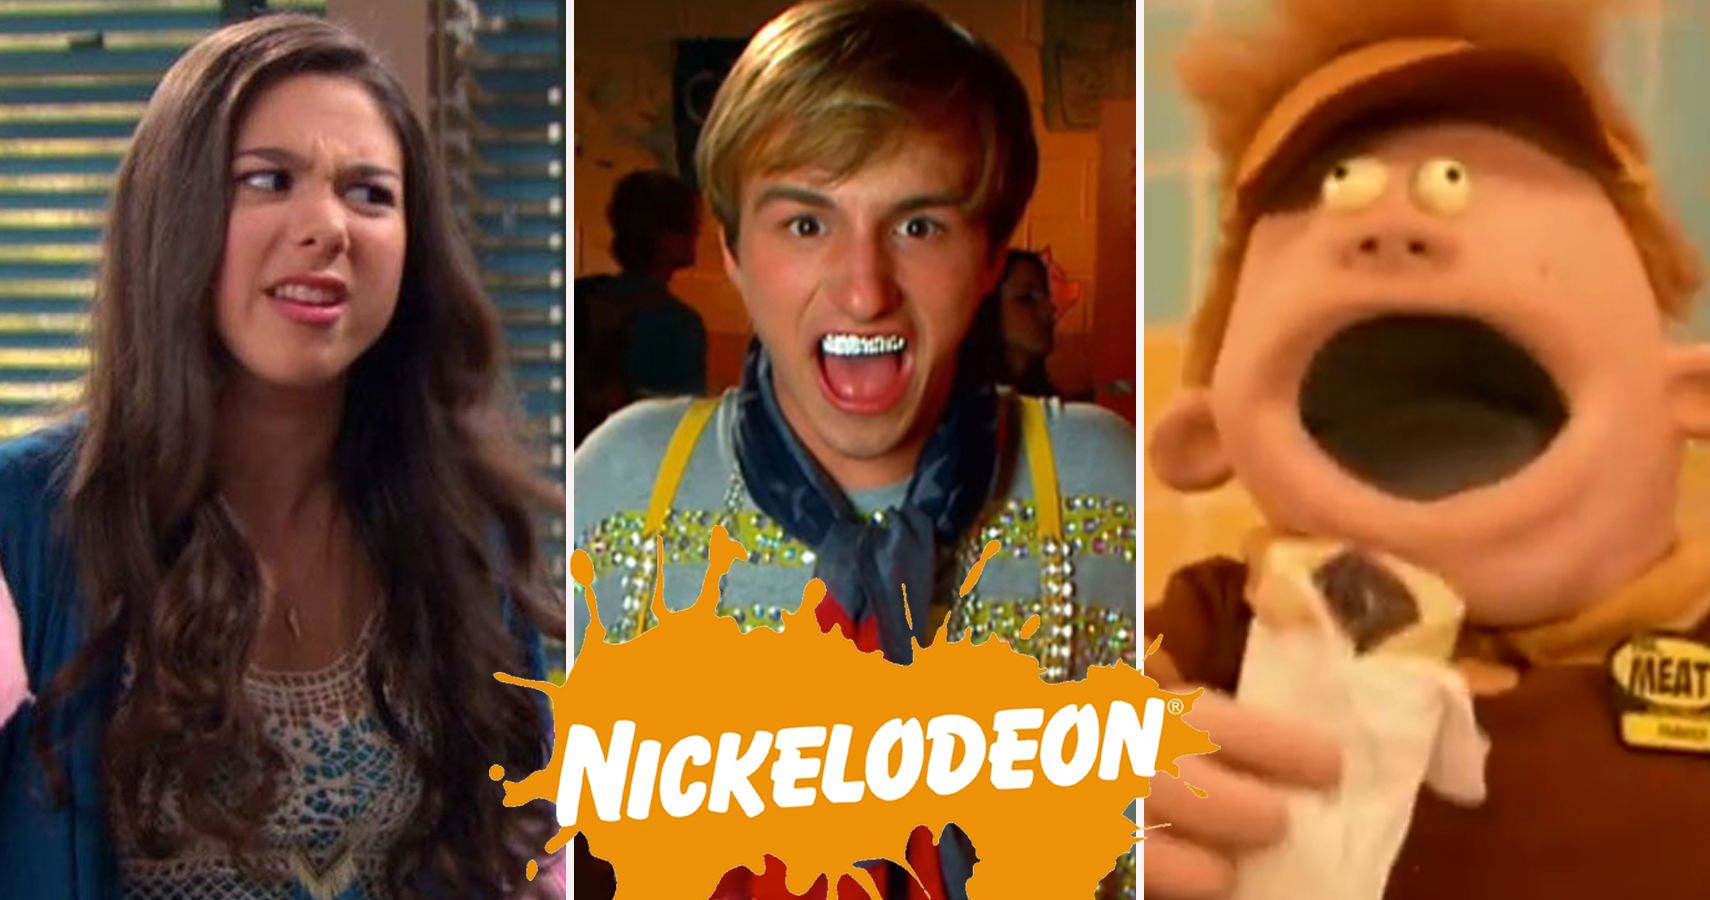 Old Nickelodeon Shows 2000s Live Action